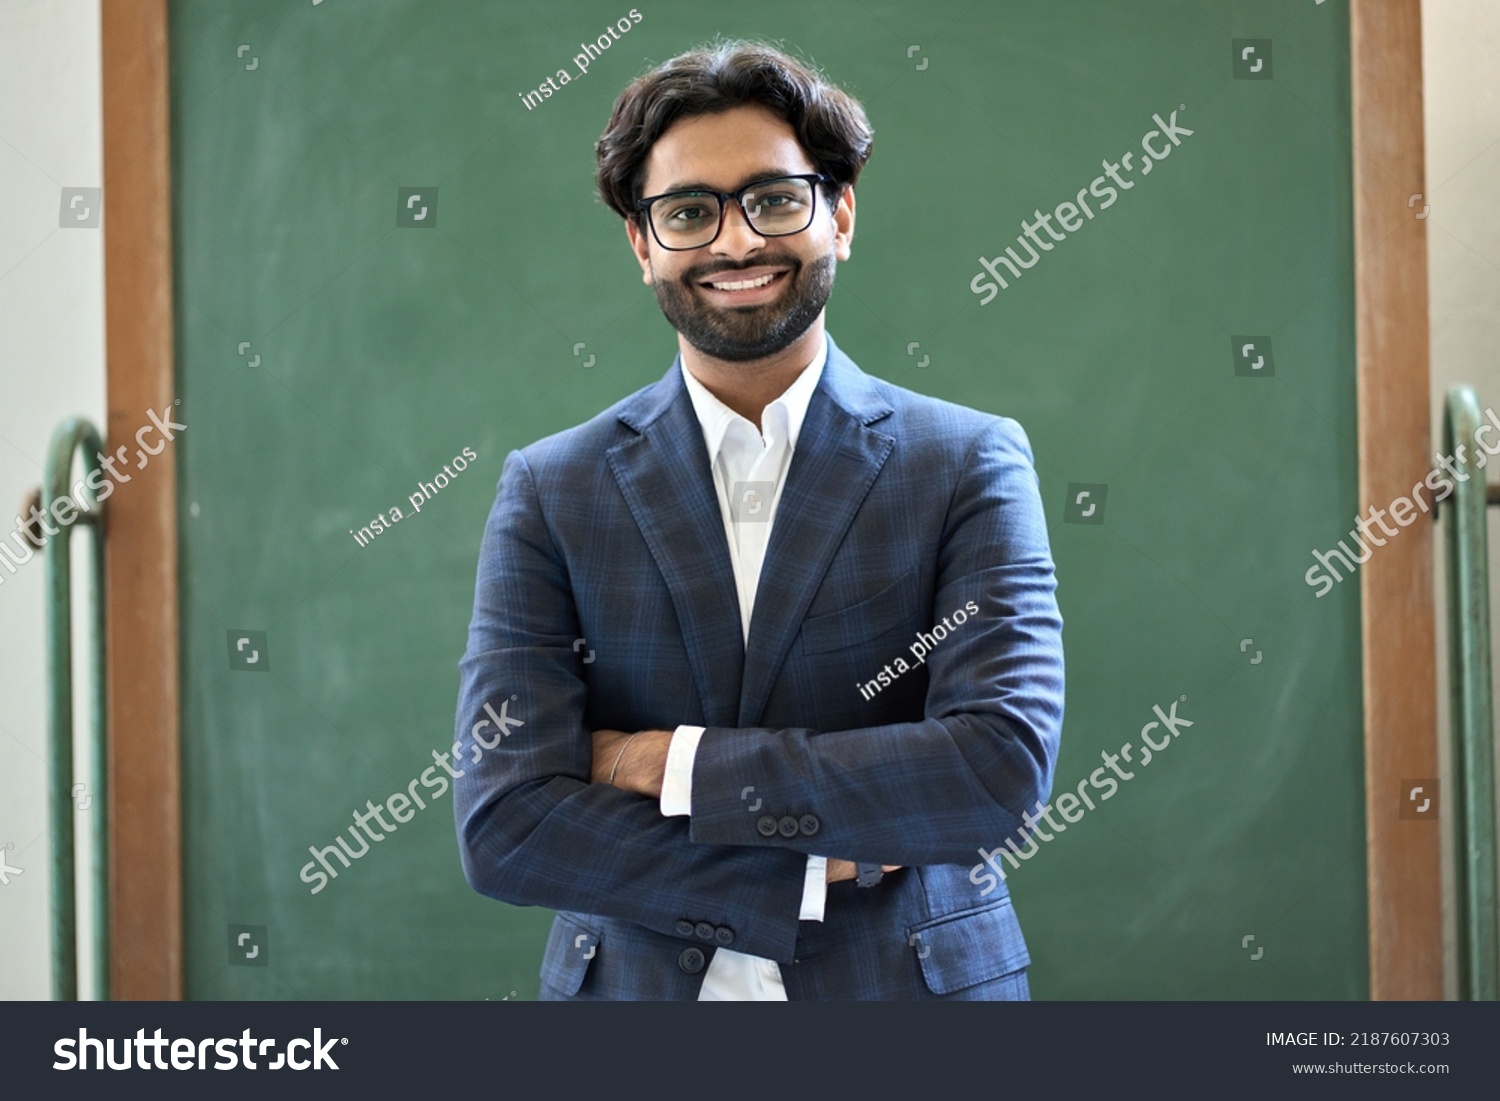 Smiling young indian business man professional manager wearing suit looking at camera standing arms crossed in office. Arab teacher or professor posing for portrait at work desk in front of #2187607303